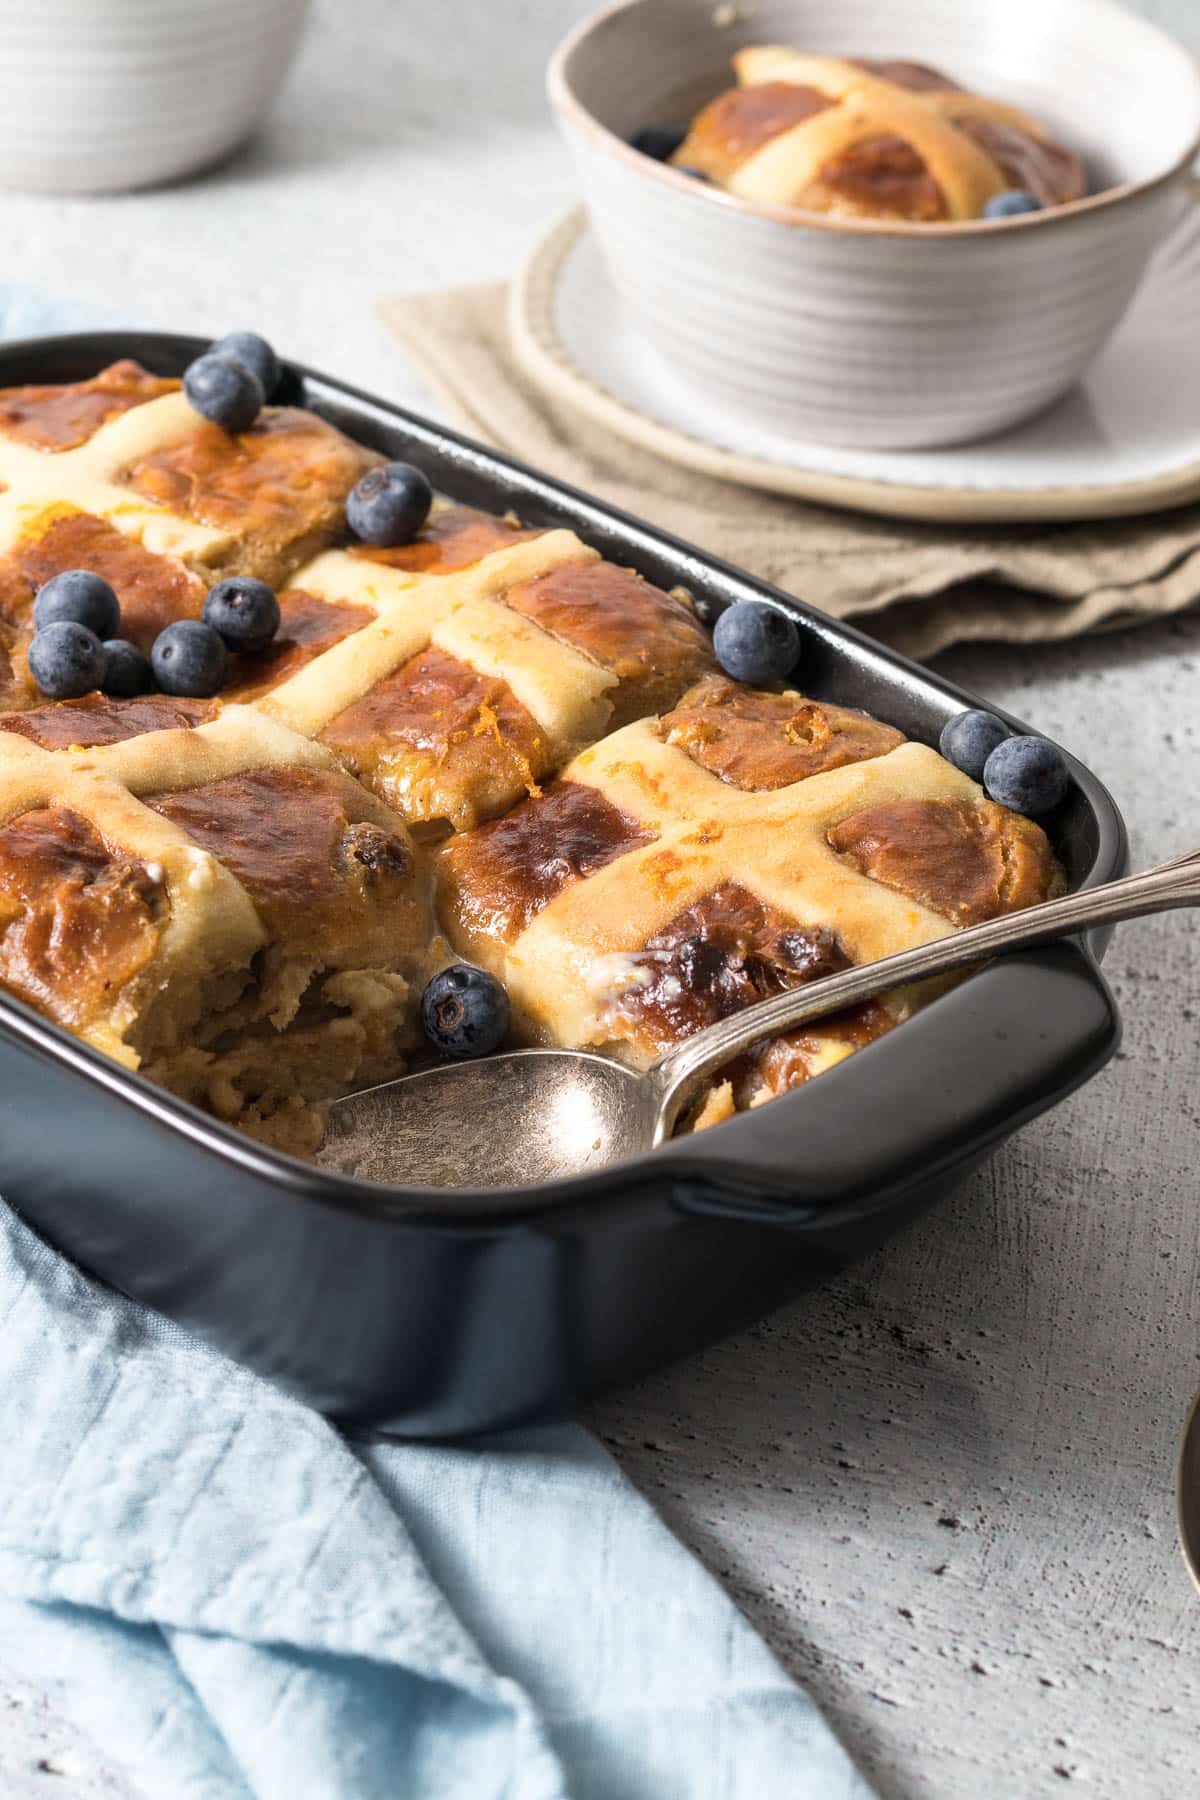 Hot cross bread and butter pudding in a casserole dish.